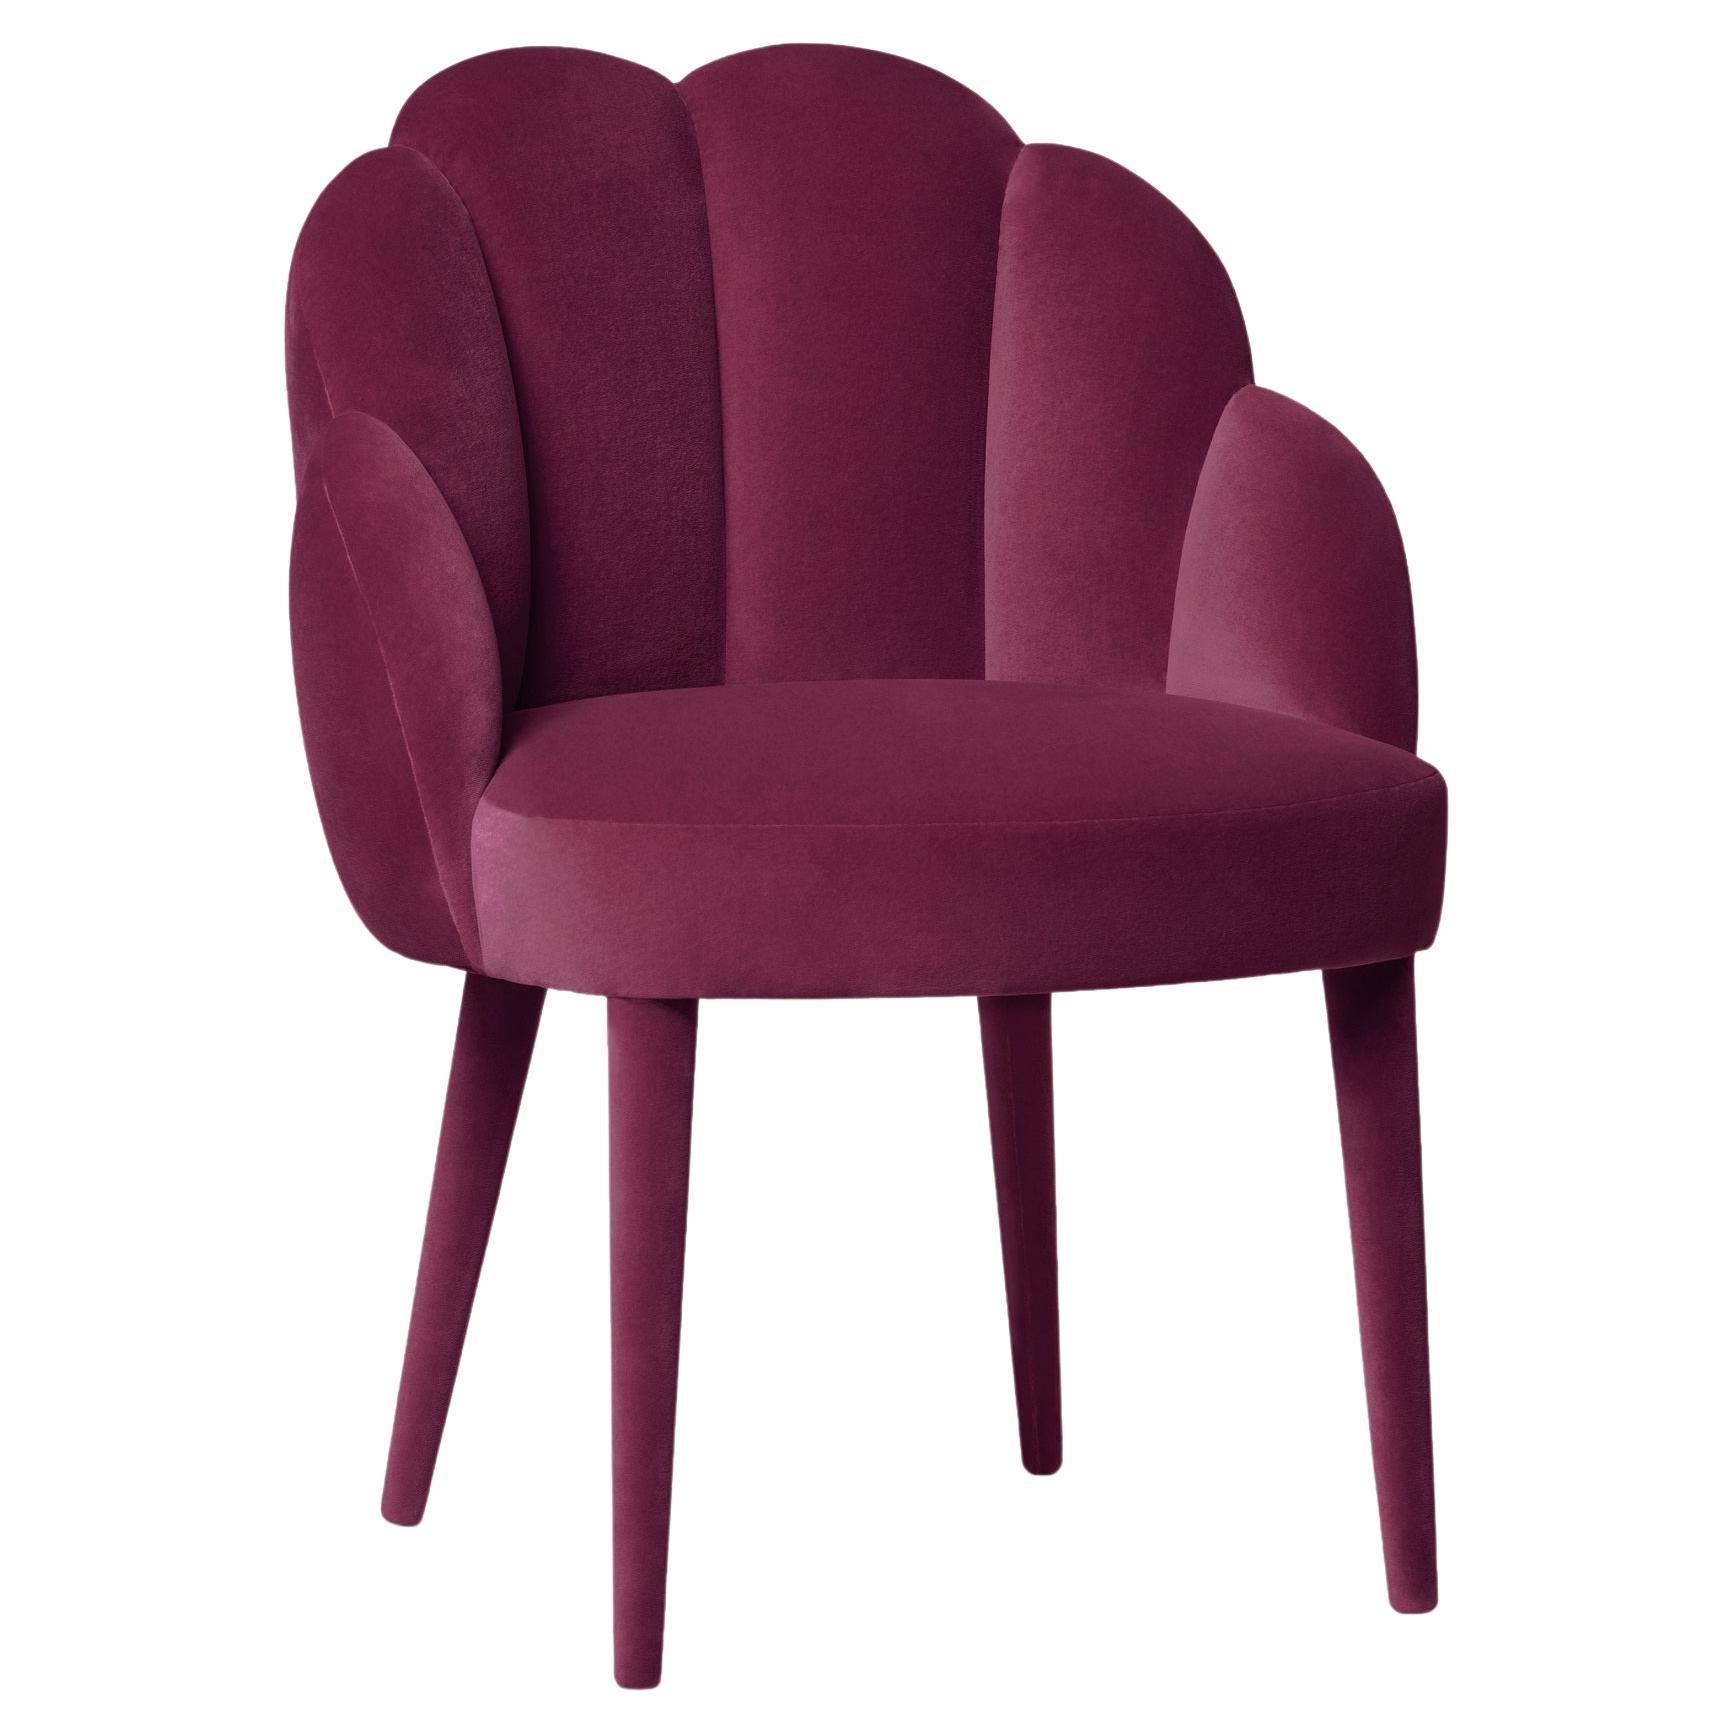 This dining chair redefines the need for curves in an interior. As playful as it is graceful, its superbly detailed segments in the front and reverse provide a plateau where the seat gently lays. An absolute must for a dining setting with a sense of